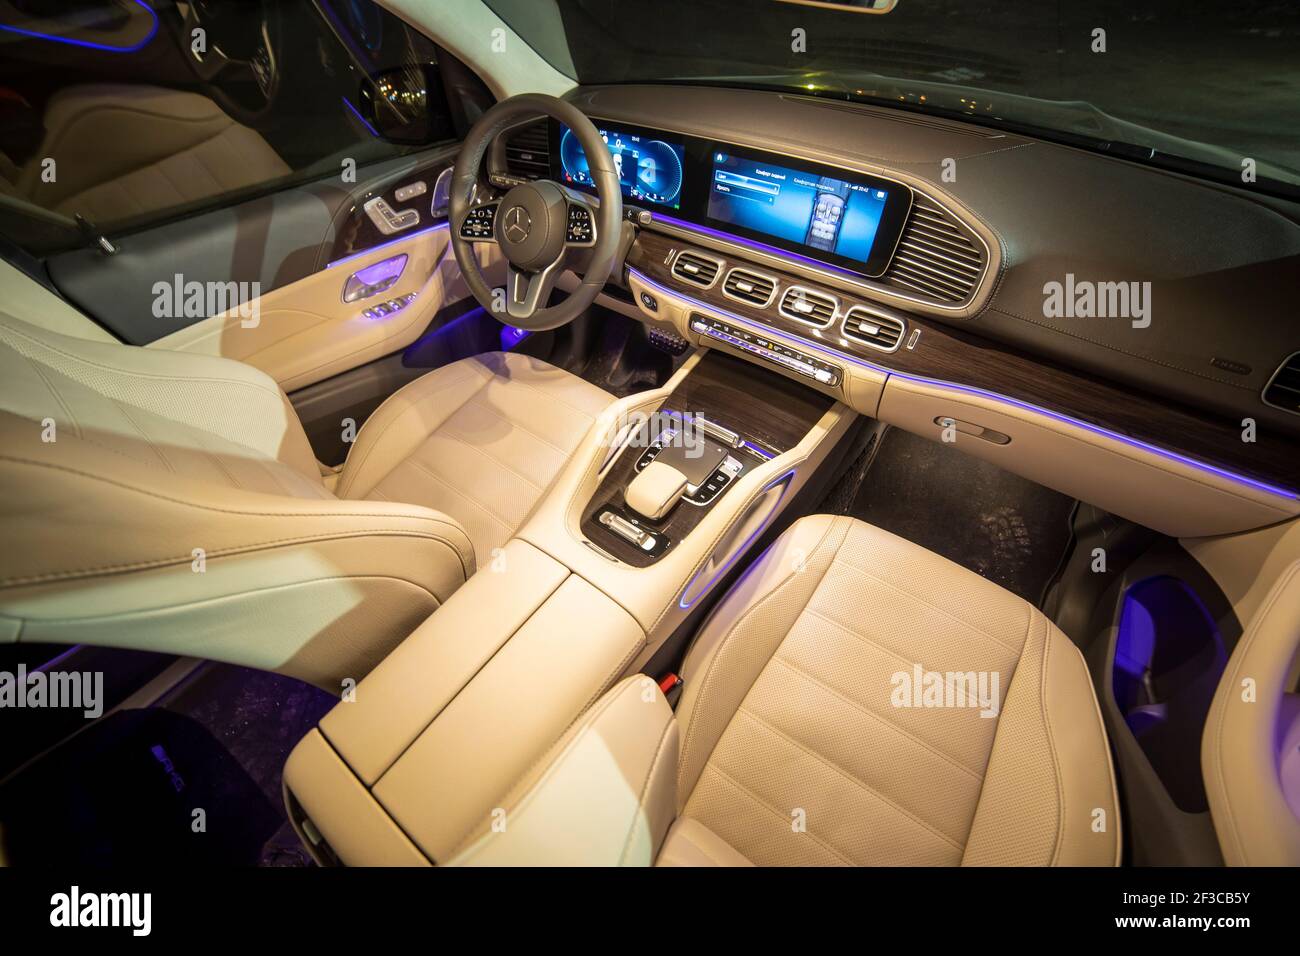 Moscow, Russia - December 24, 2019: Empty interior of light leather interior  of premium SUV Mercedes GLS class night shooting. with colored LED ambien  Stock Photo - Alamy